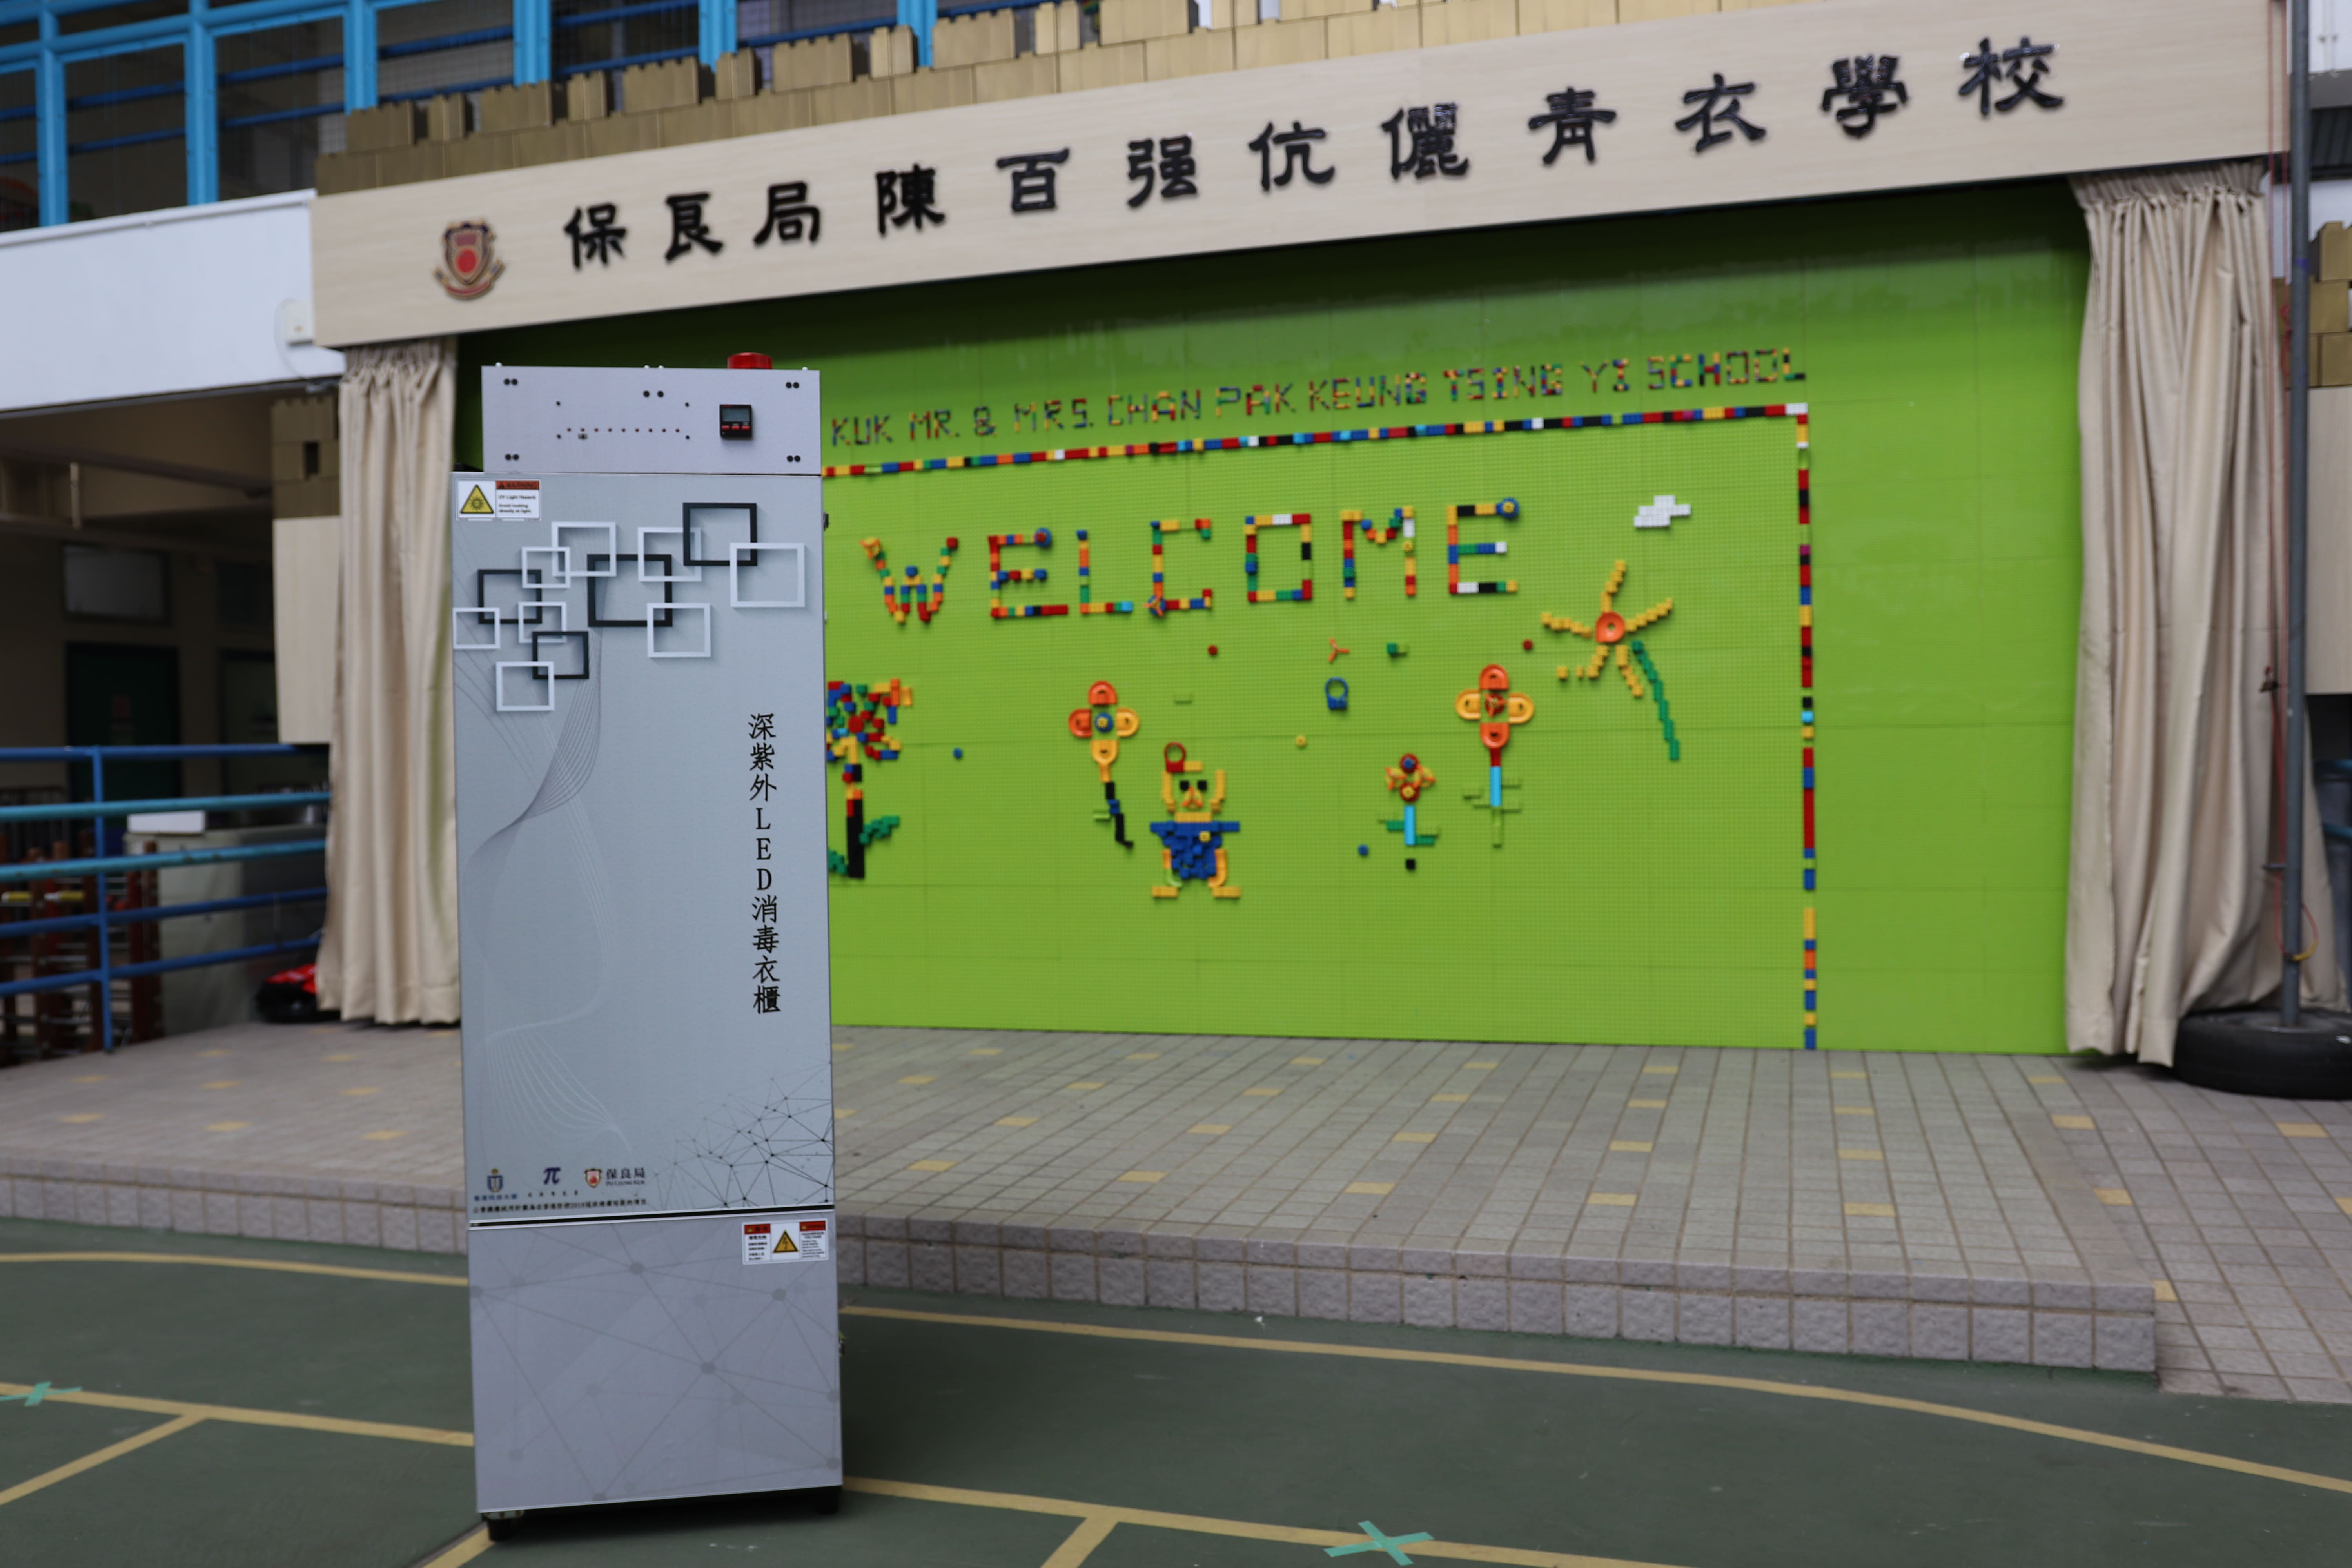 The closet is now being trialled in three of Po Leung Kuk special schools - including Po Leung Kuk Mr. & Mrs. Chan Pak Keung Tsing Yi School (as pictured).